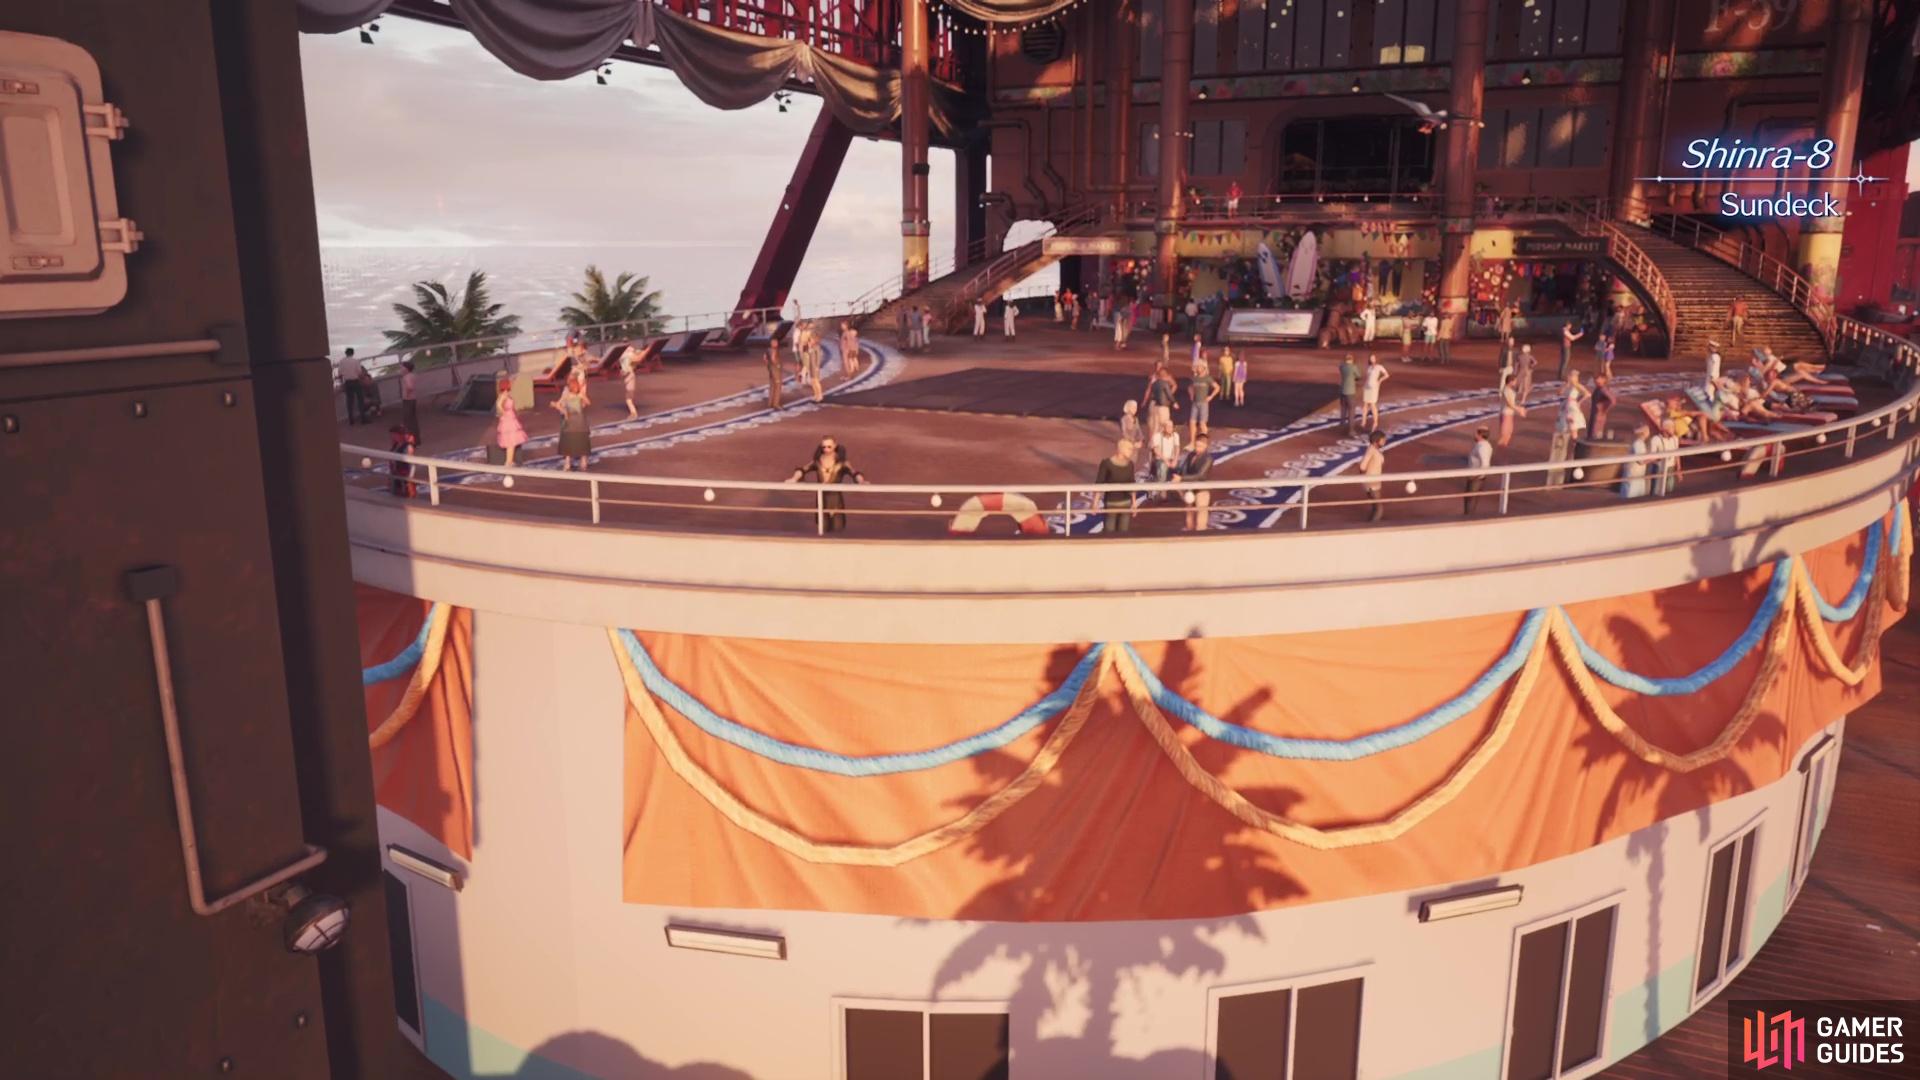 Chapter 5 will take place on the Shinra-8 cruise ship.